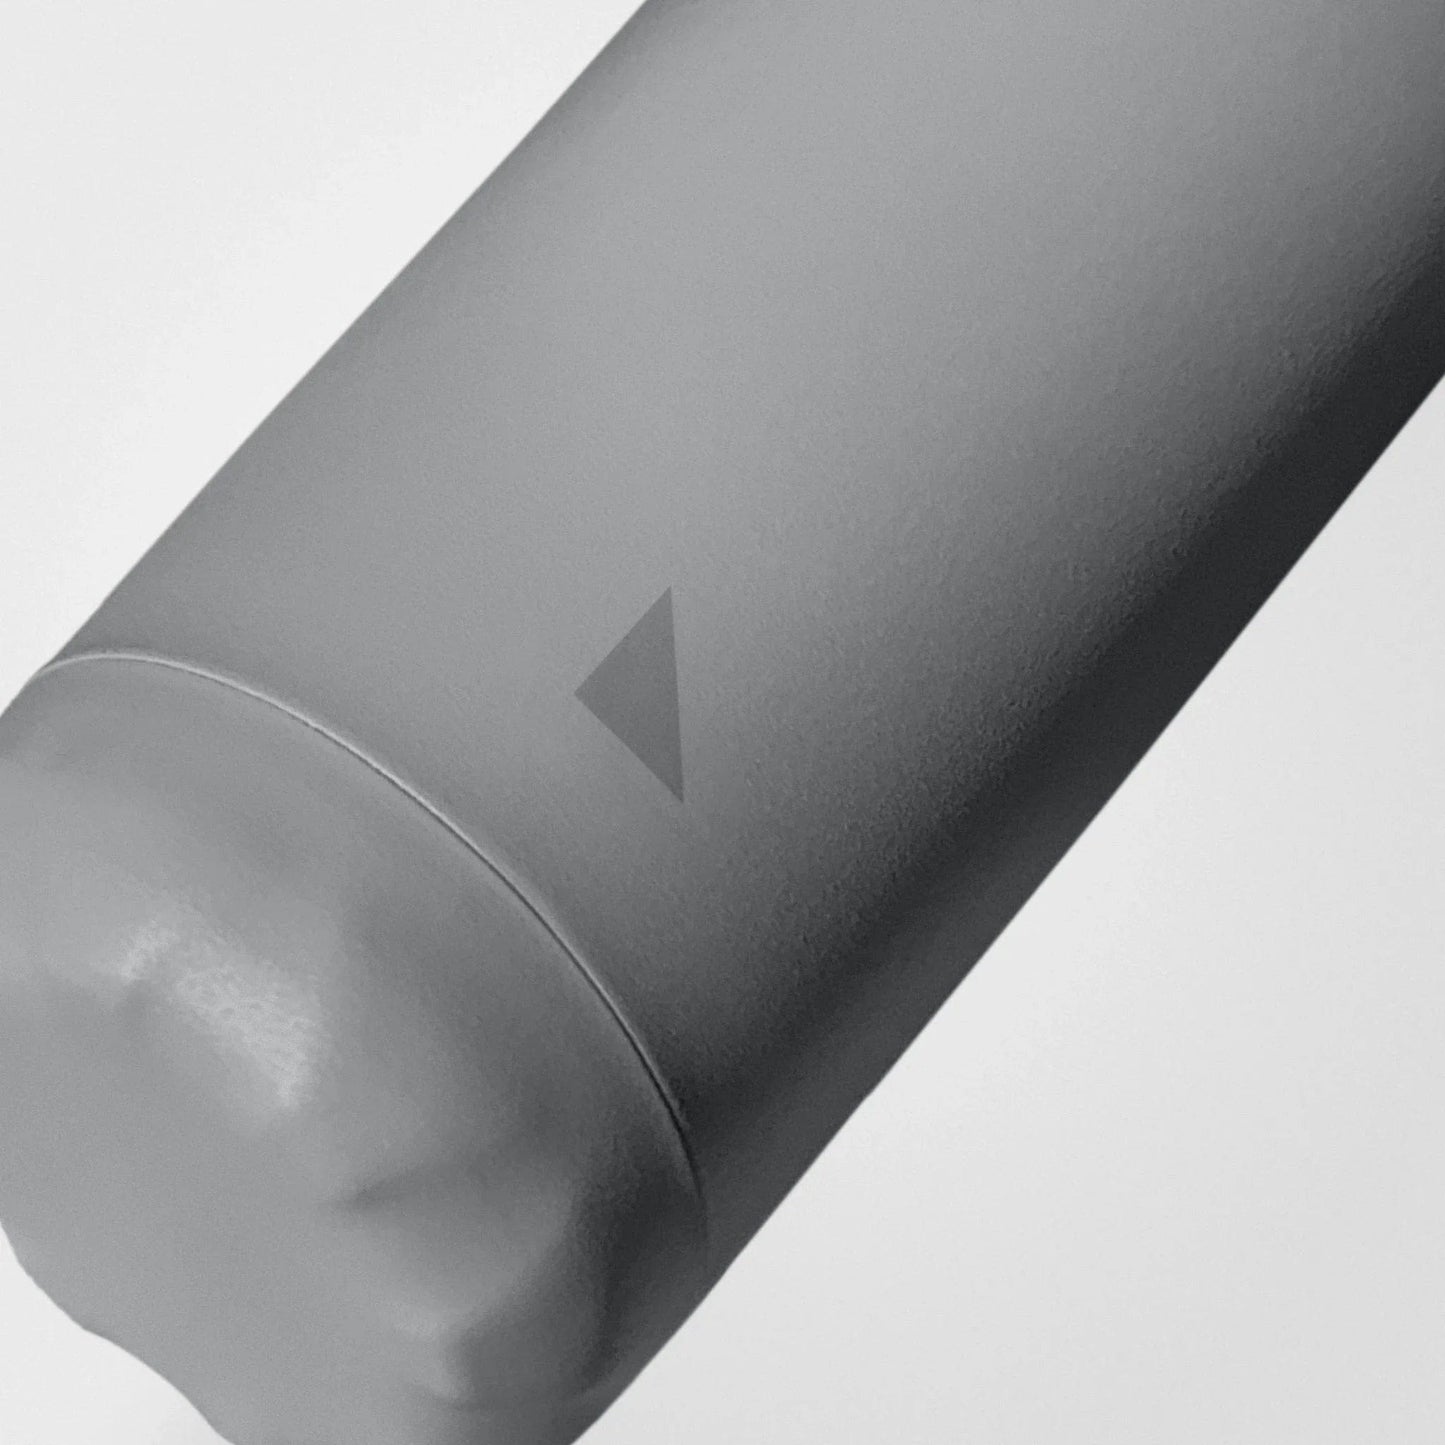 Thermal bottle made from recycled steel, Stone Grey